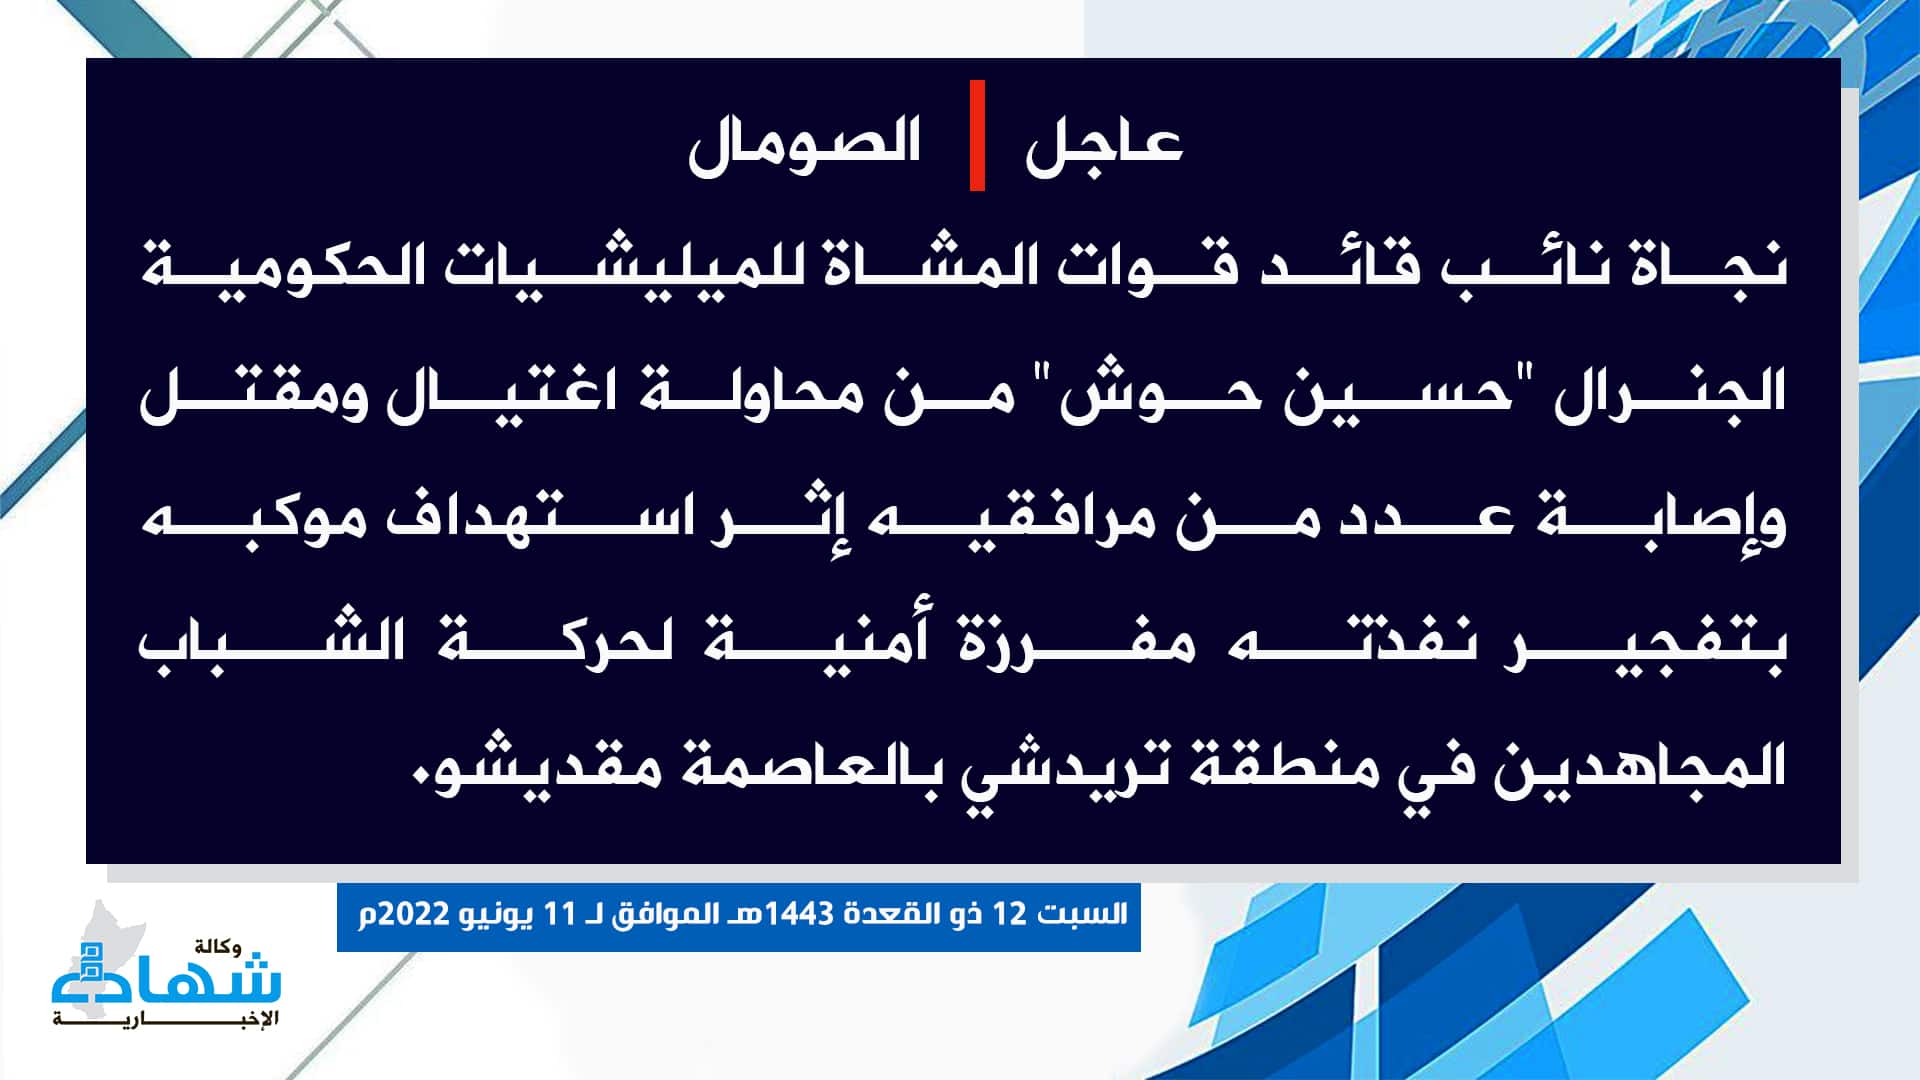 (Claim) al-Shabaab: A Deputy of a Somalian Infantry Commander, Hussain Housh, Survived an Assassination Attempt and His Guards Were Killed and Injured in an IED Attack in Tridshi District, Mogadishu, Somalia - 11 June 2022